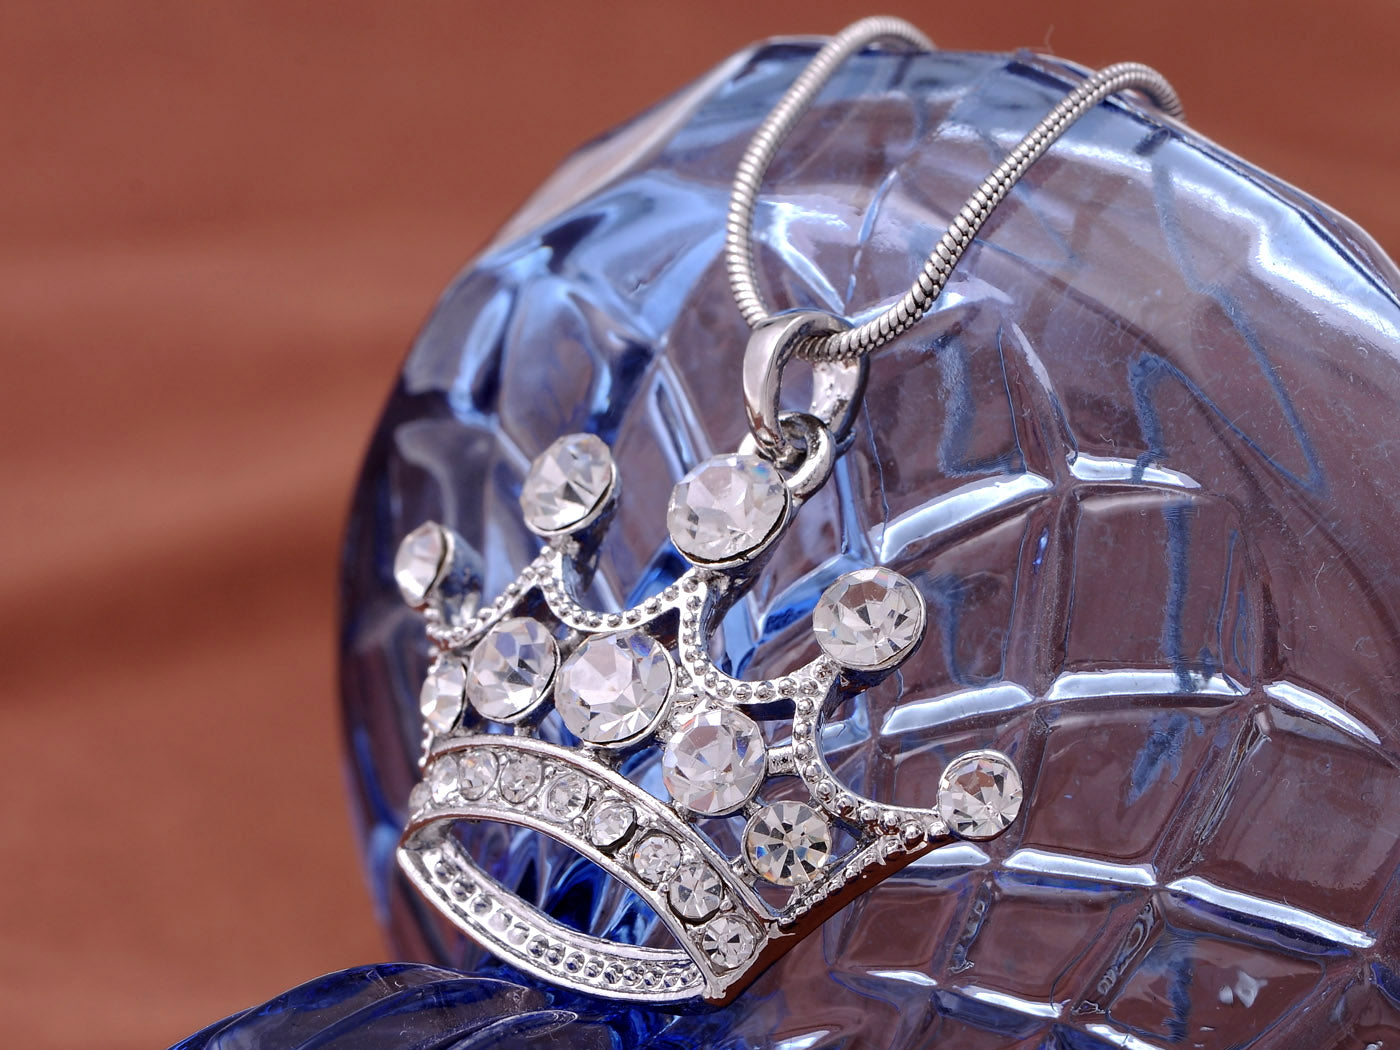 Emperor Royal Crown Pendant Necklace Perfect For King & Queens!